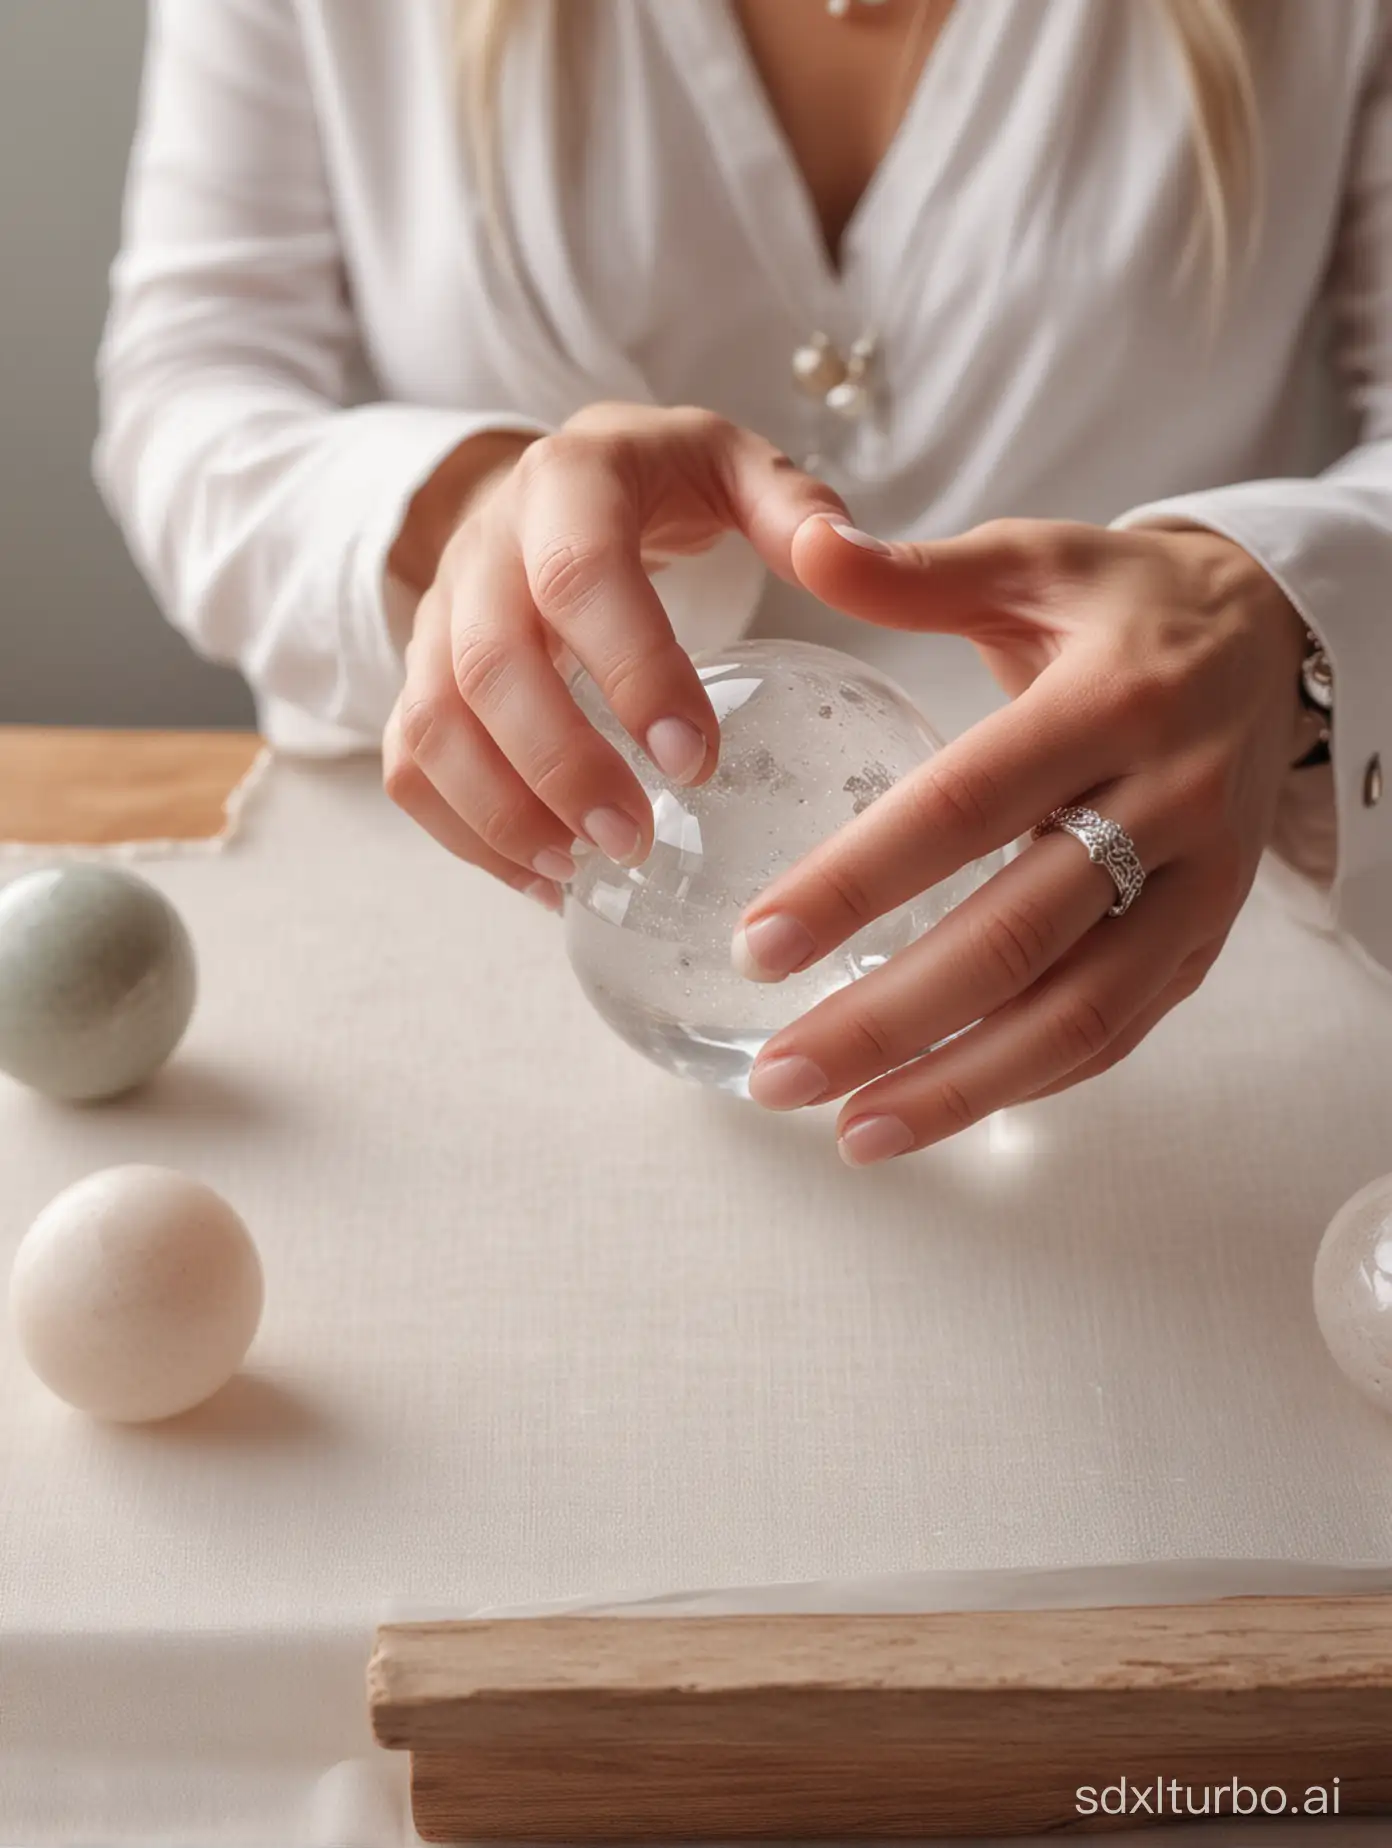 Close up of hands with silver rings holding a white quartz crystal ball on a table, in the photo for an Instagram post about meditation and healing in a New York City kundalini yoga studio, with pastel colors and soft light. The photo is in the style of meditation and healing.